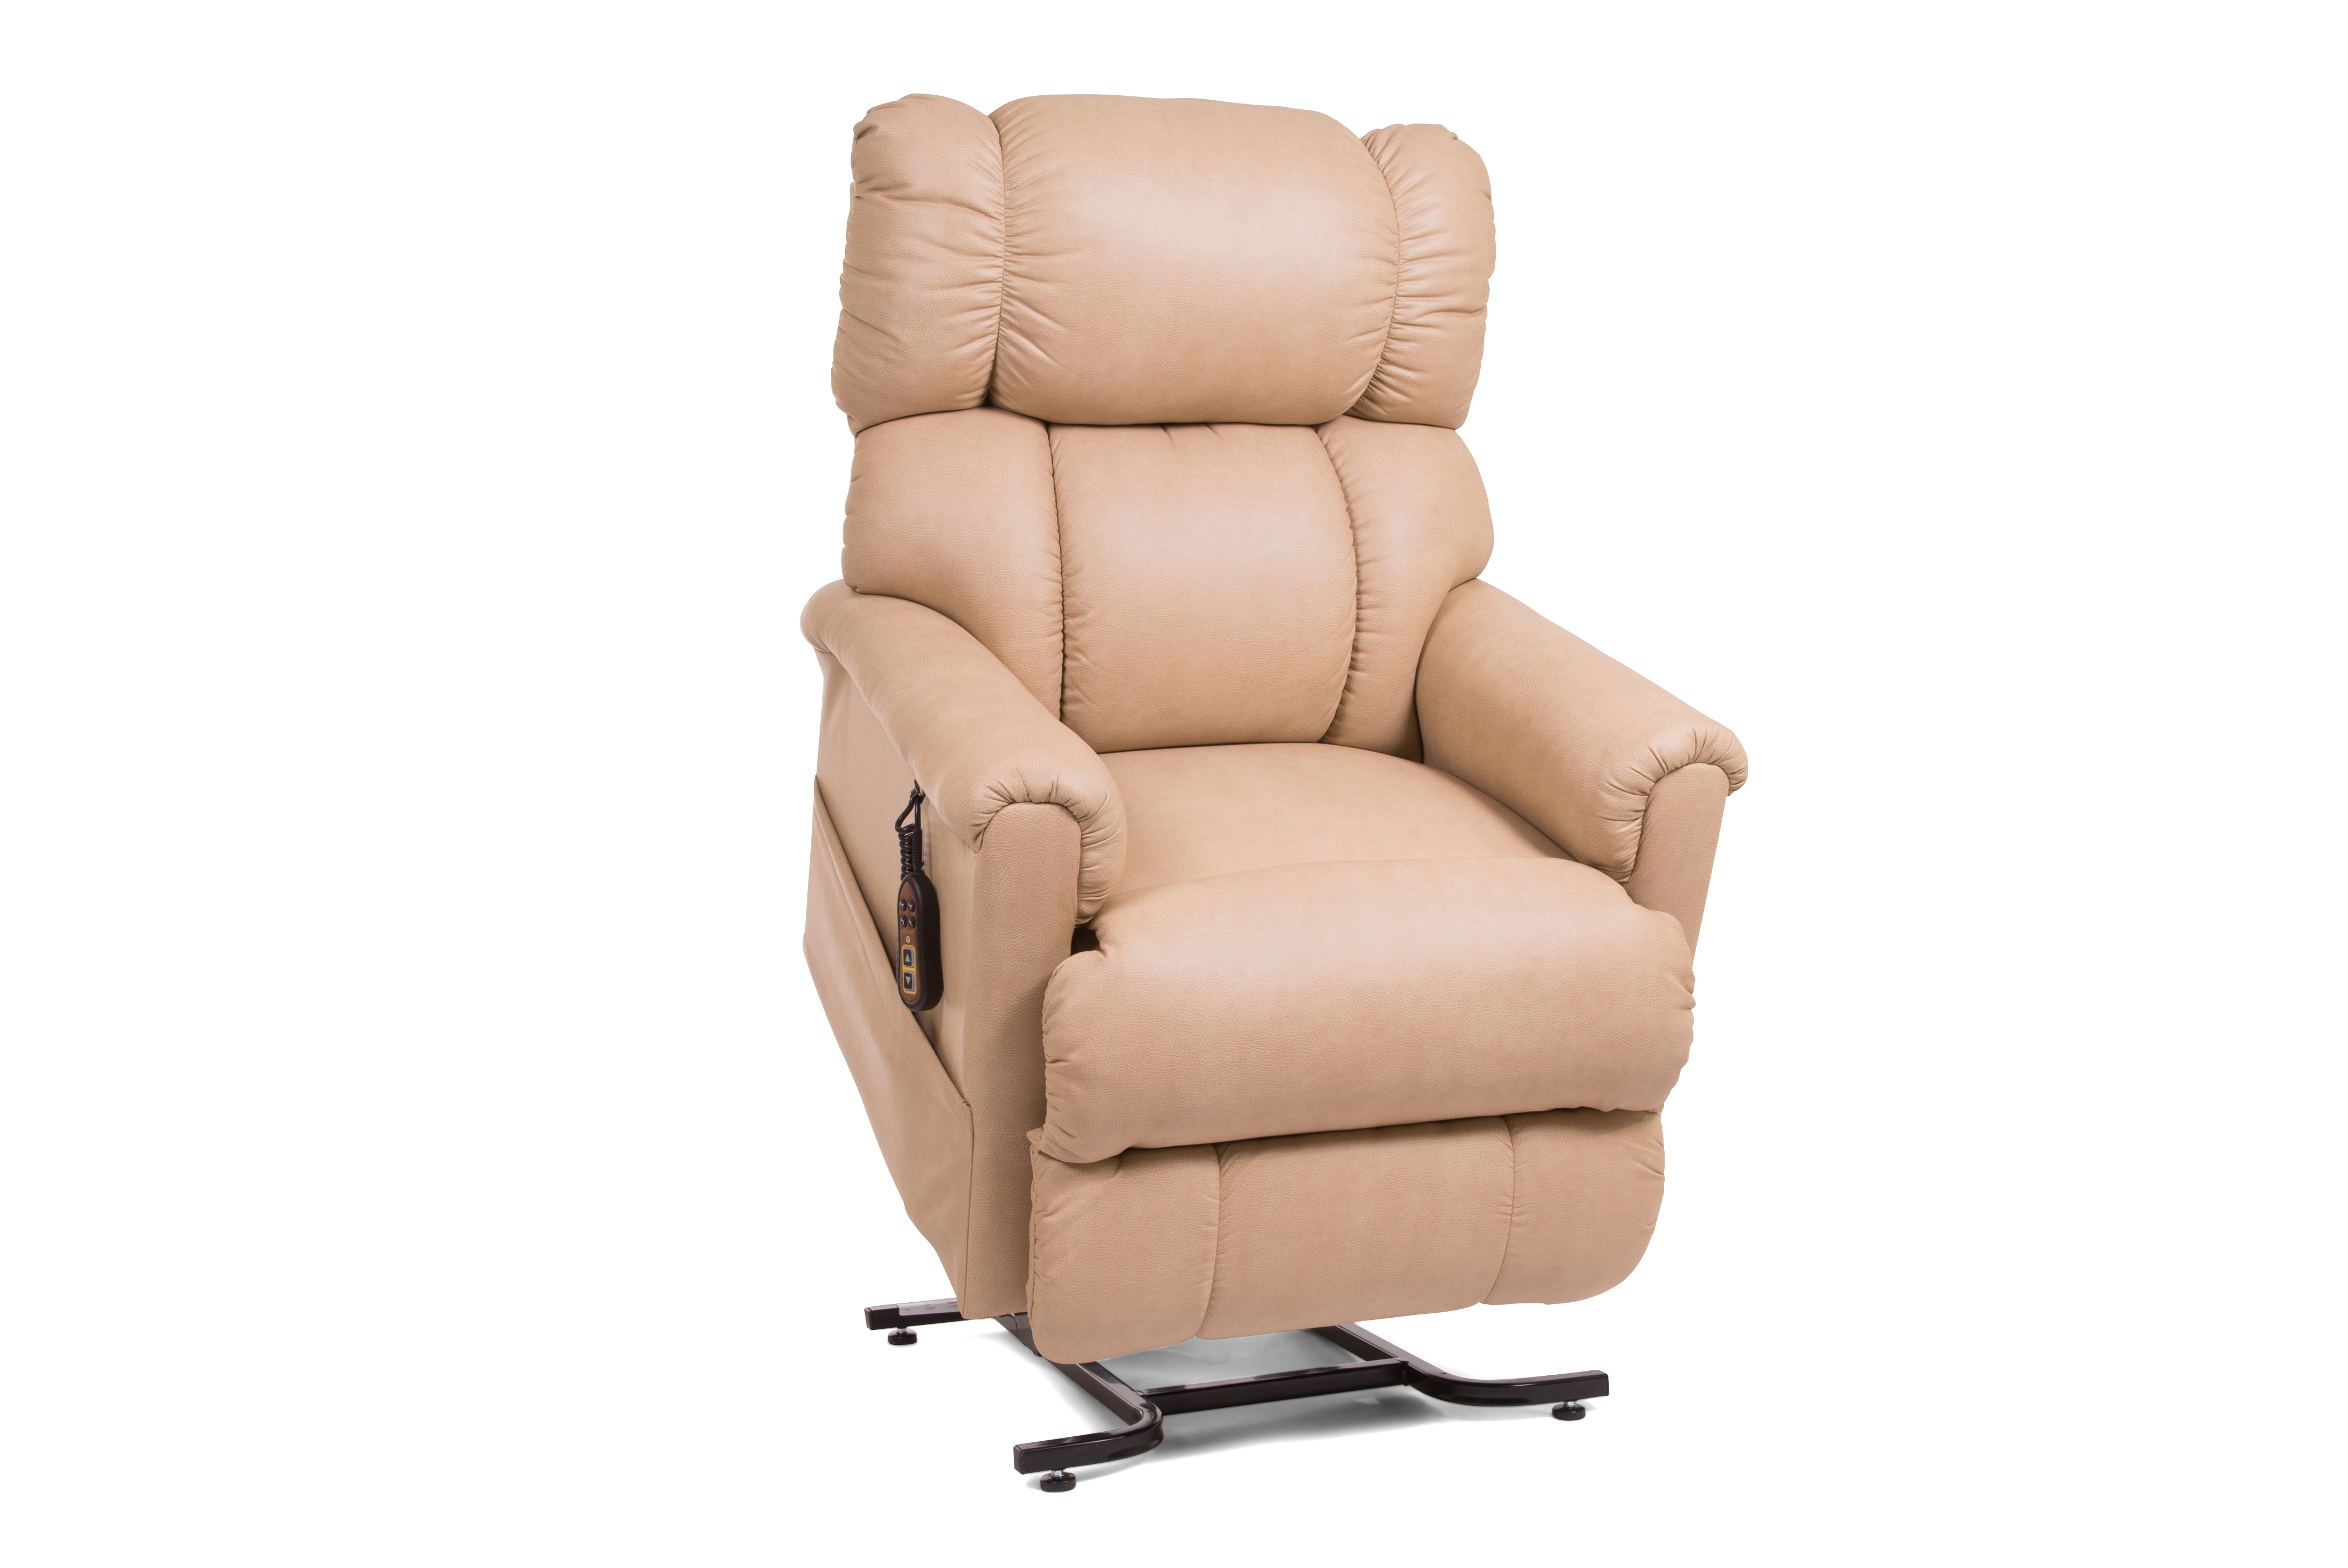 Photo of Imperial Lift Chair, Size Medium